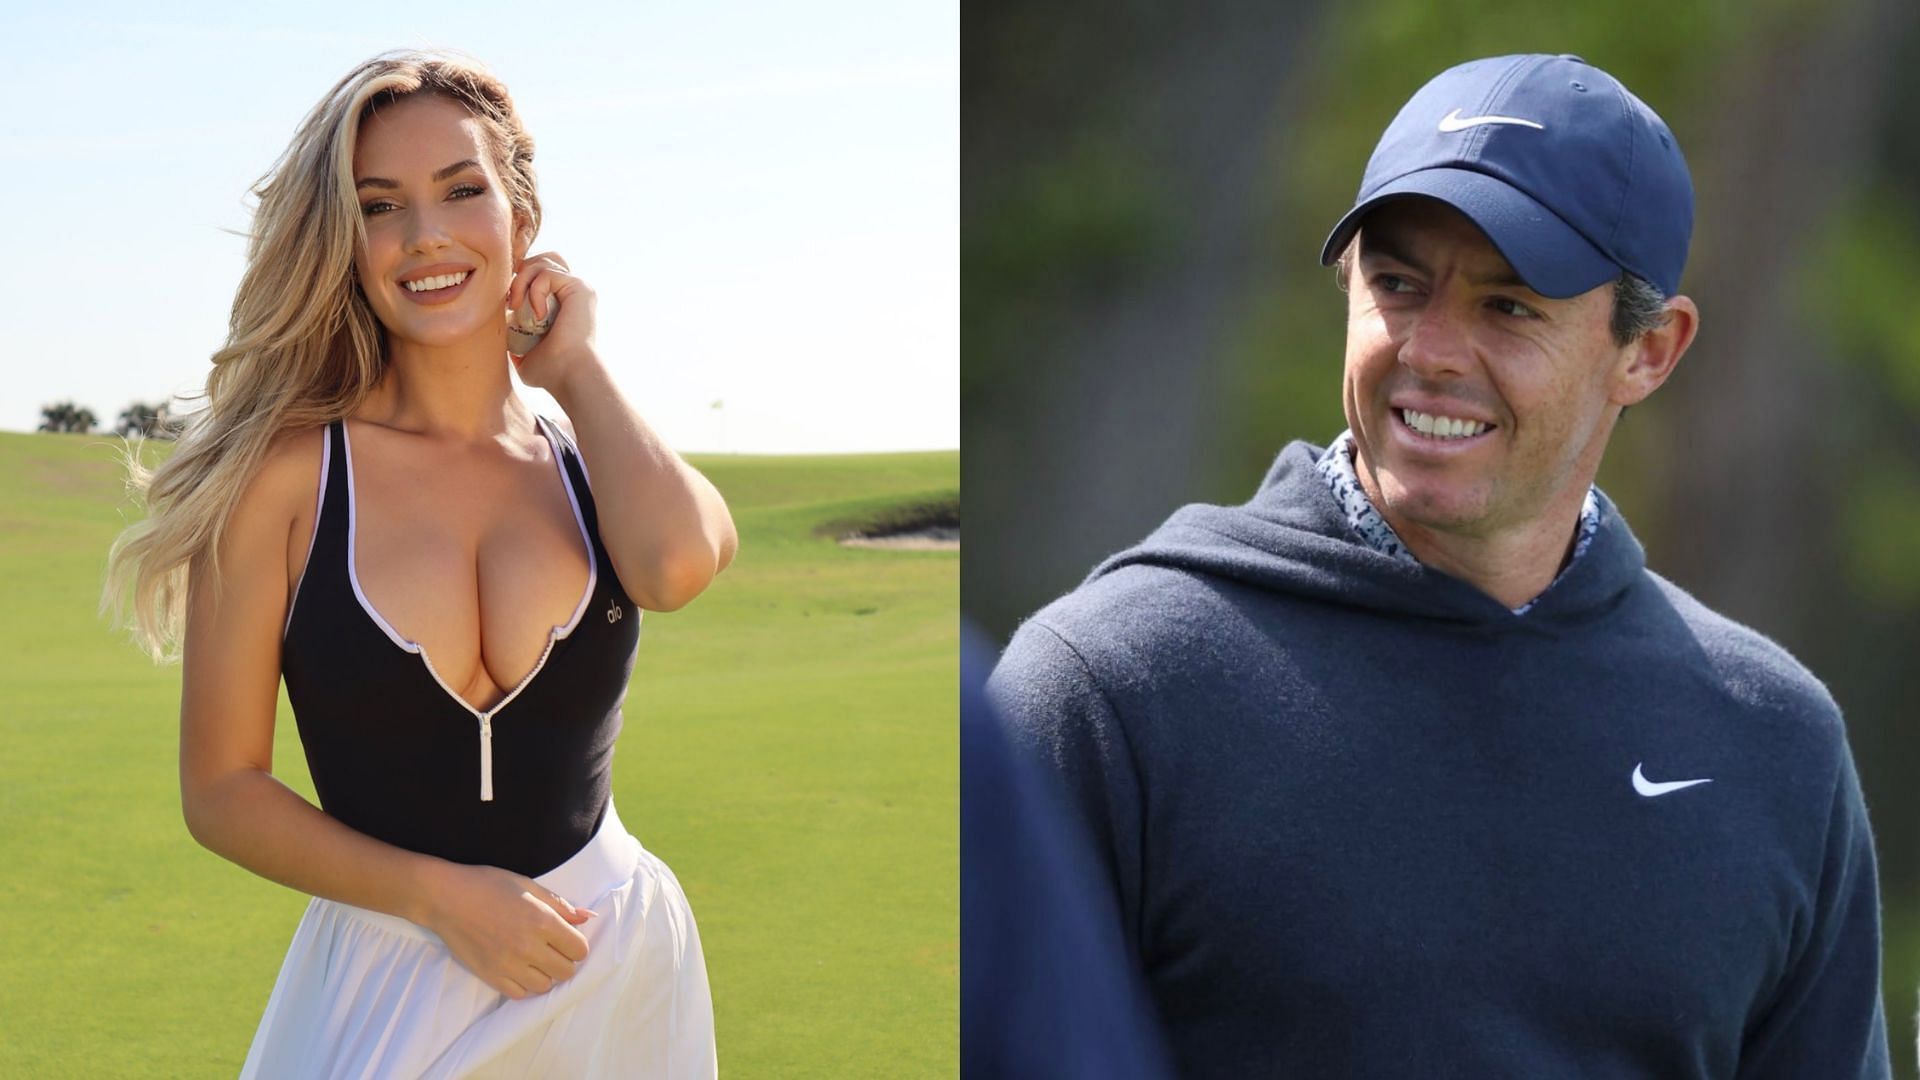 Men like golf and boobs,' says Paige Spiranac after beating Tiger Woods,  McIlroy, Fowler - Tennis Tonic - News, Predictions, H2H, Live Scores, stats